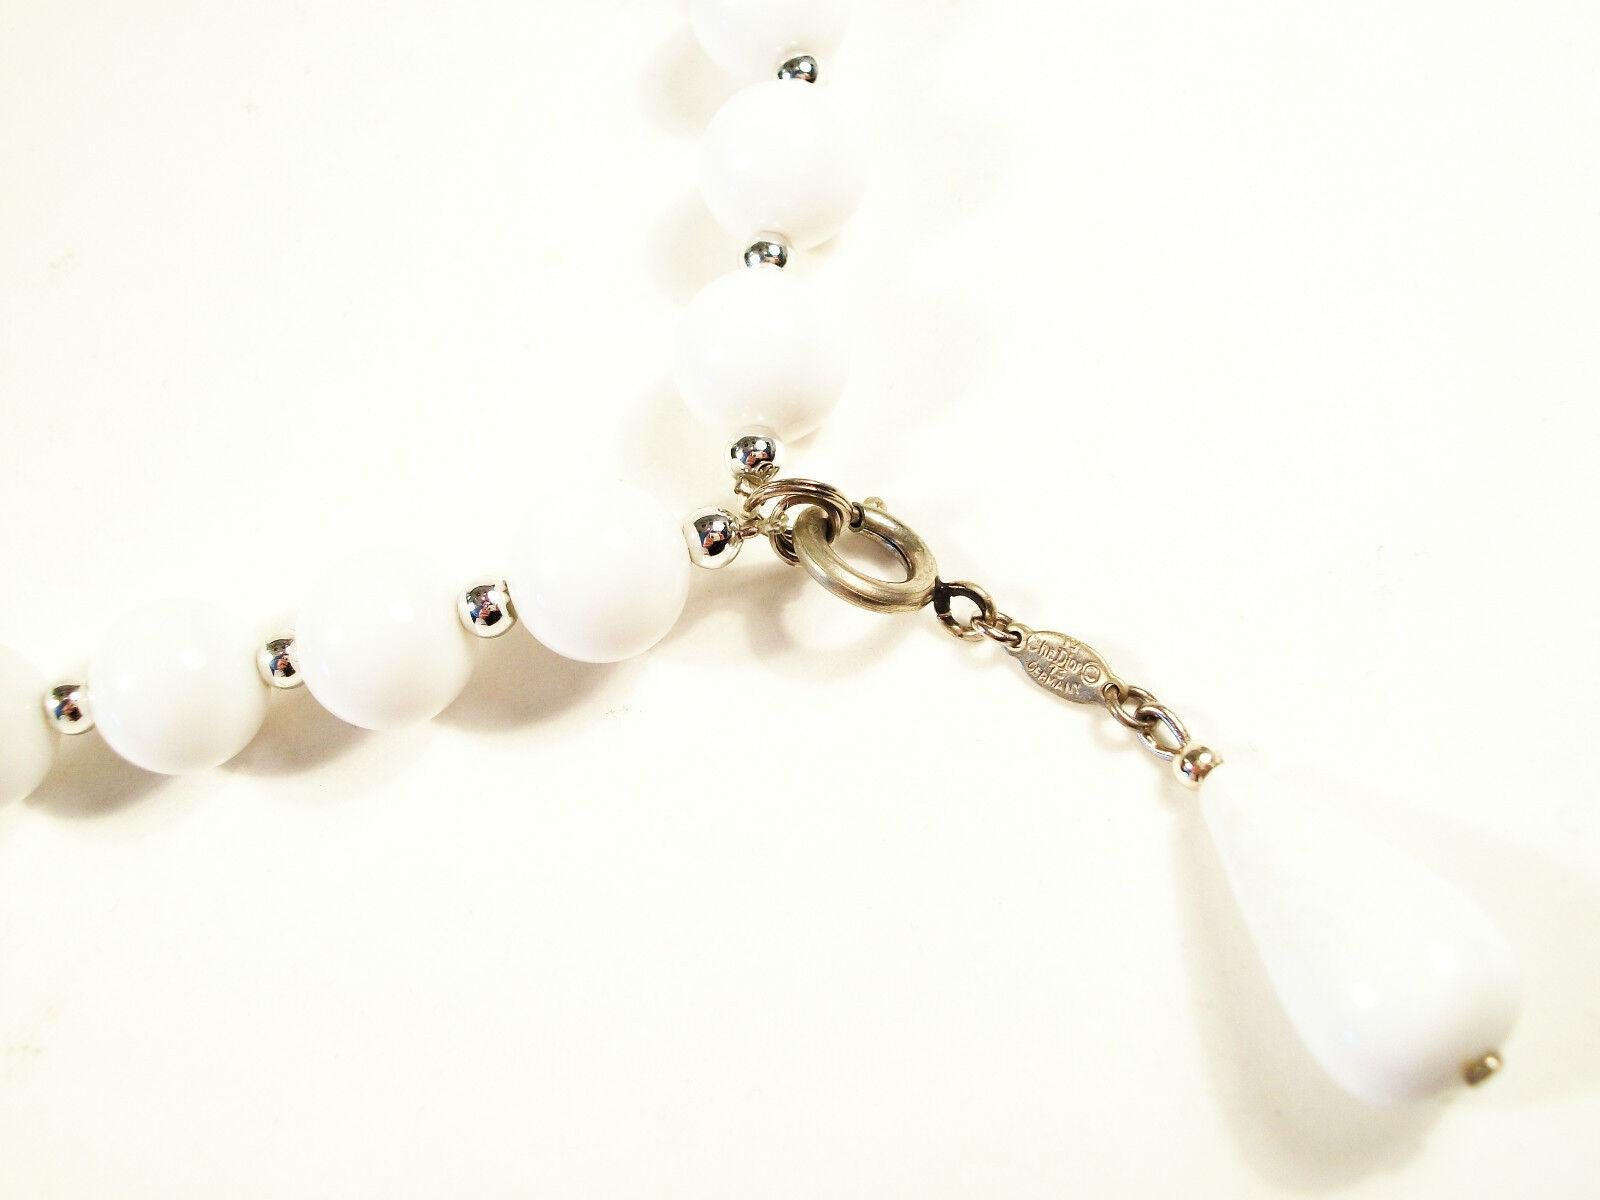 Christian Dior, Vintage Acrylic & Chrome Beaded Necklace, Signed, Circa 1973 For Sale 1